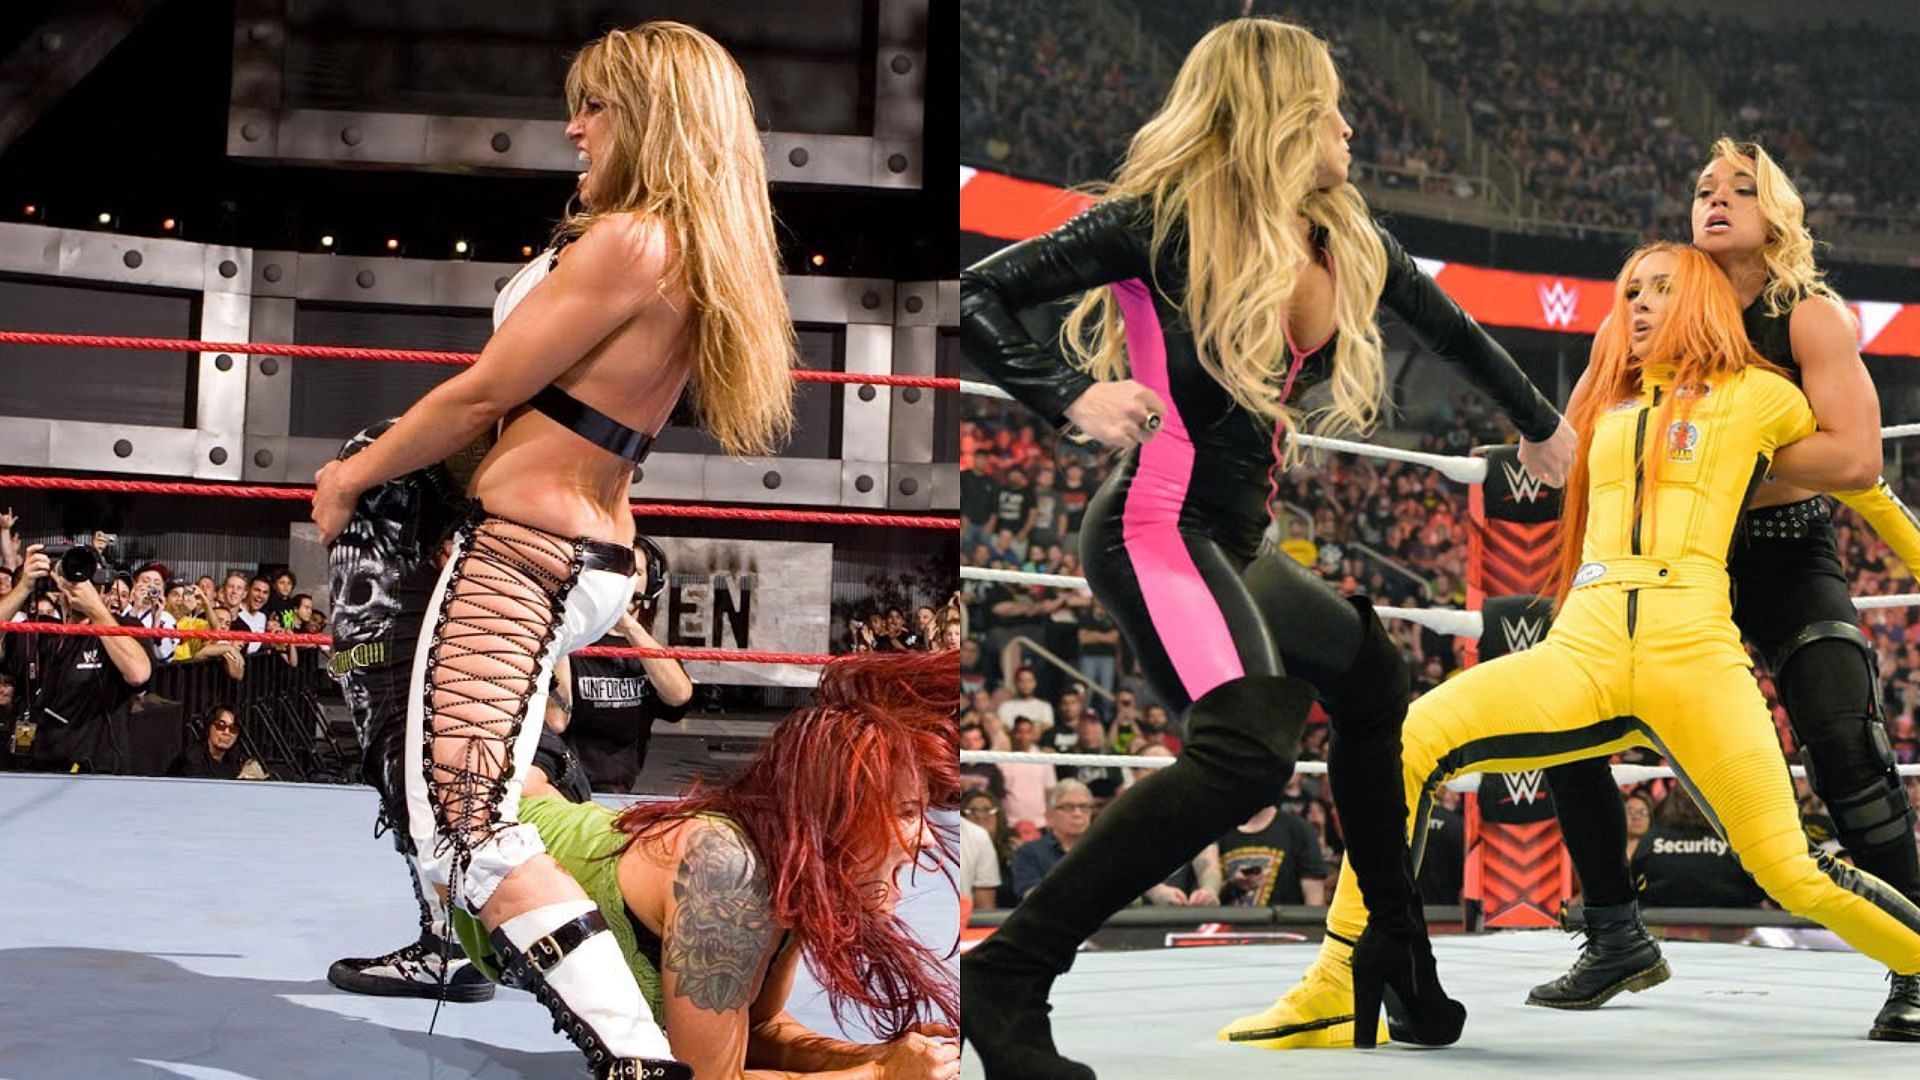 What caused Trish Stratus and her fellow WWE Hall of Famer to step away?